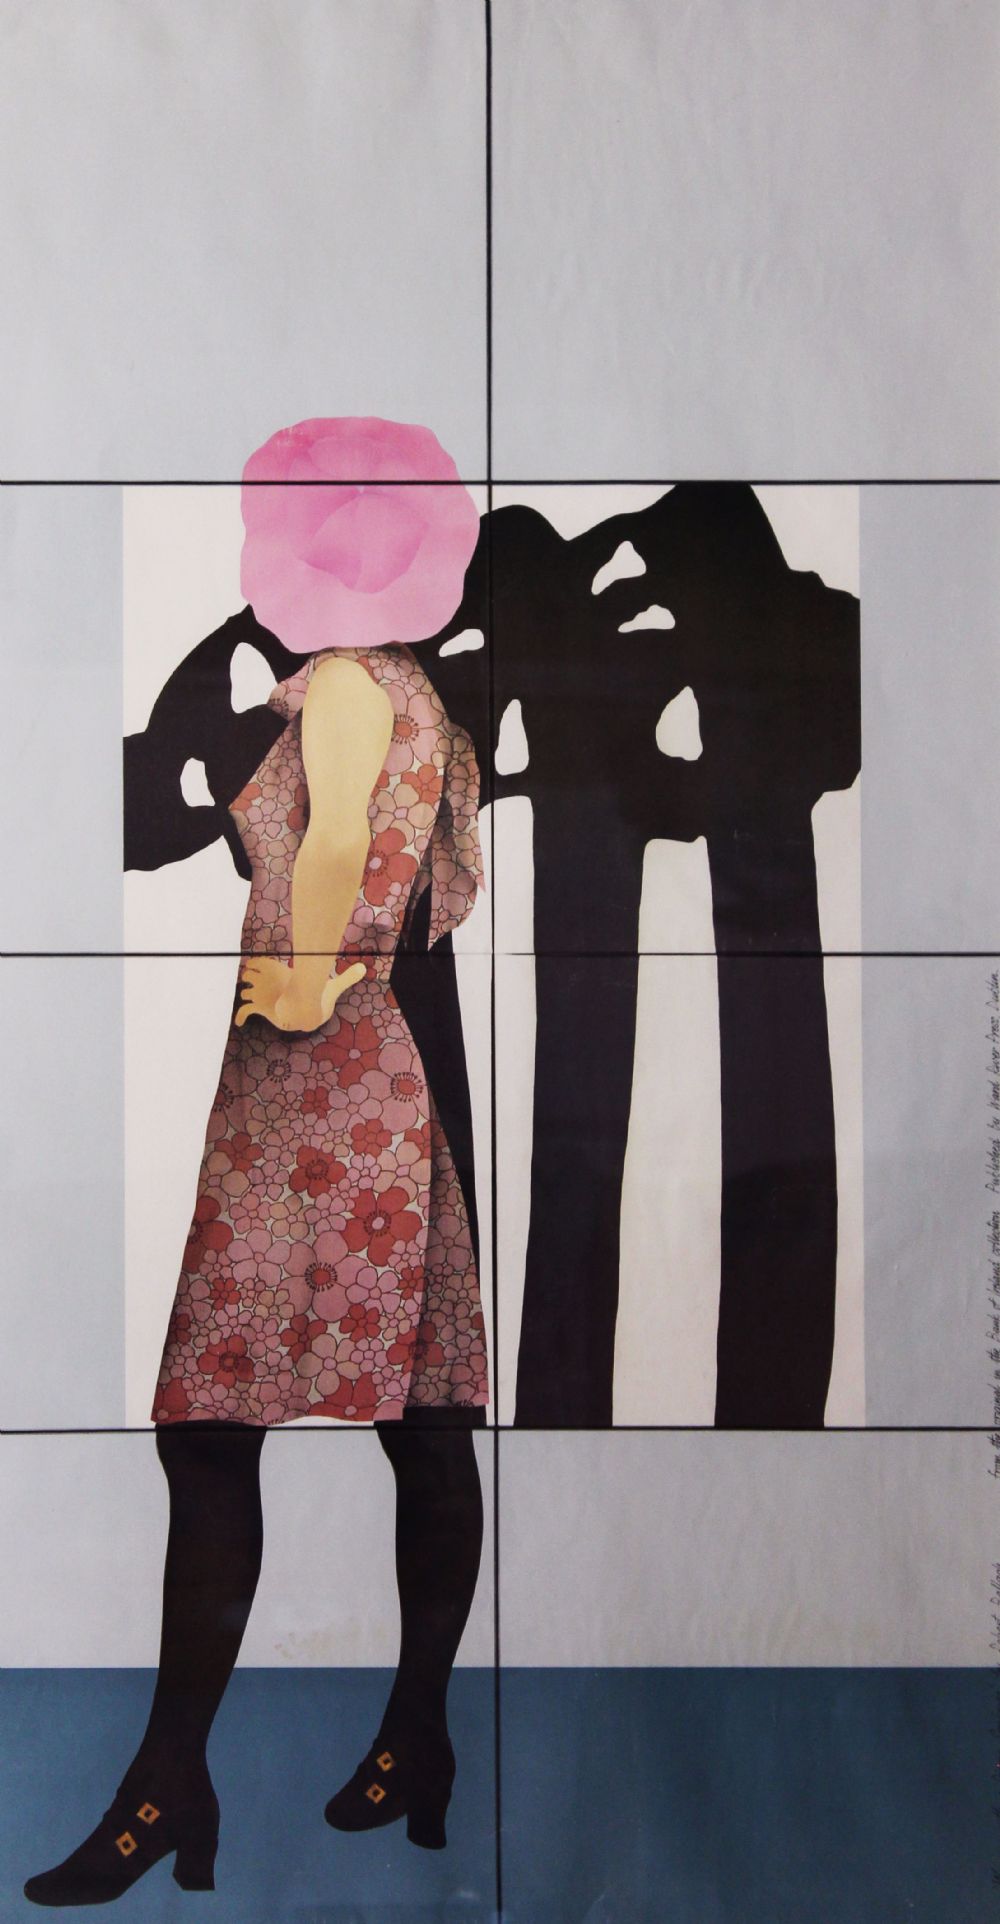 WOMAN WITH A PIERRE SOULAGES by Robert Ballagh sold for €500 at deVeres Auctions